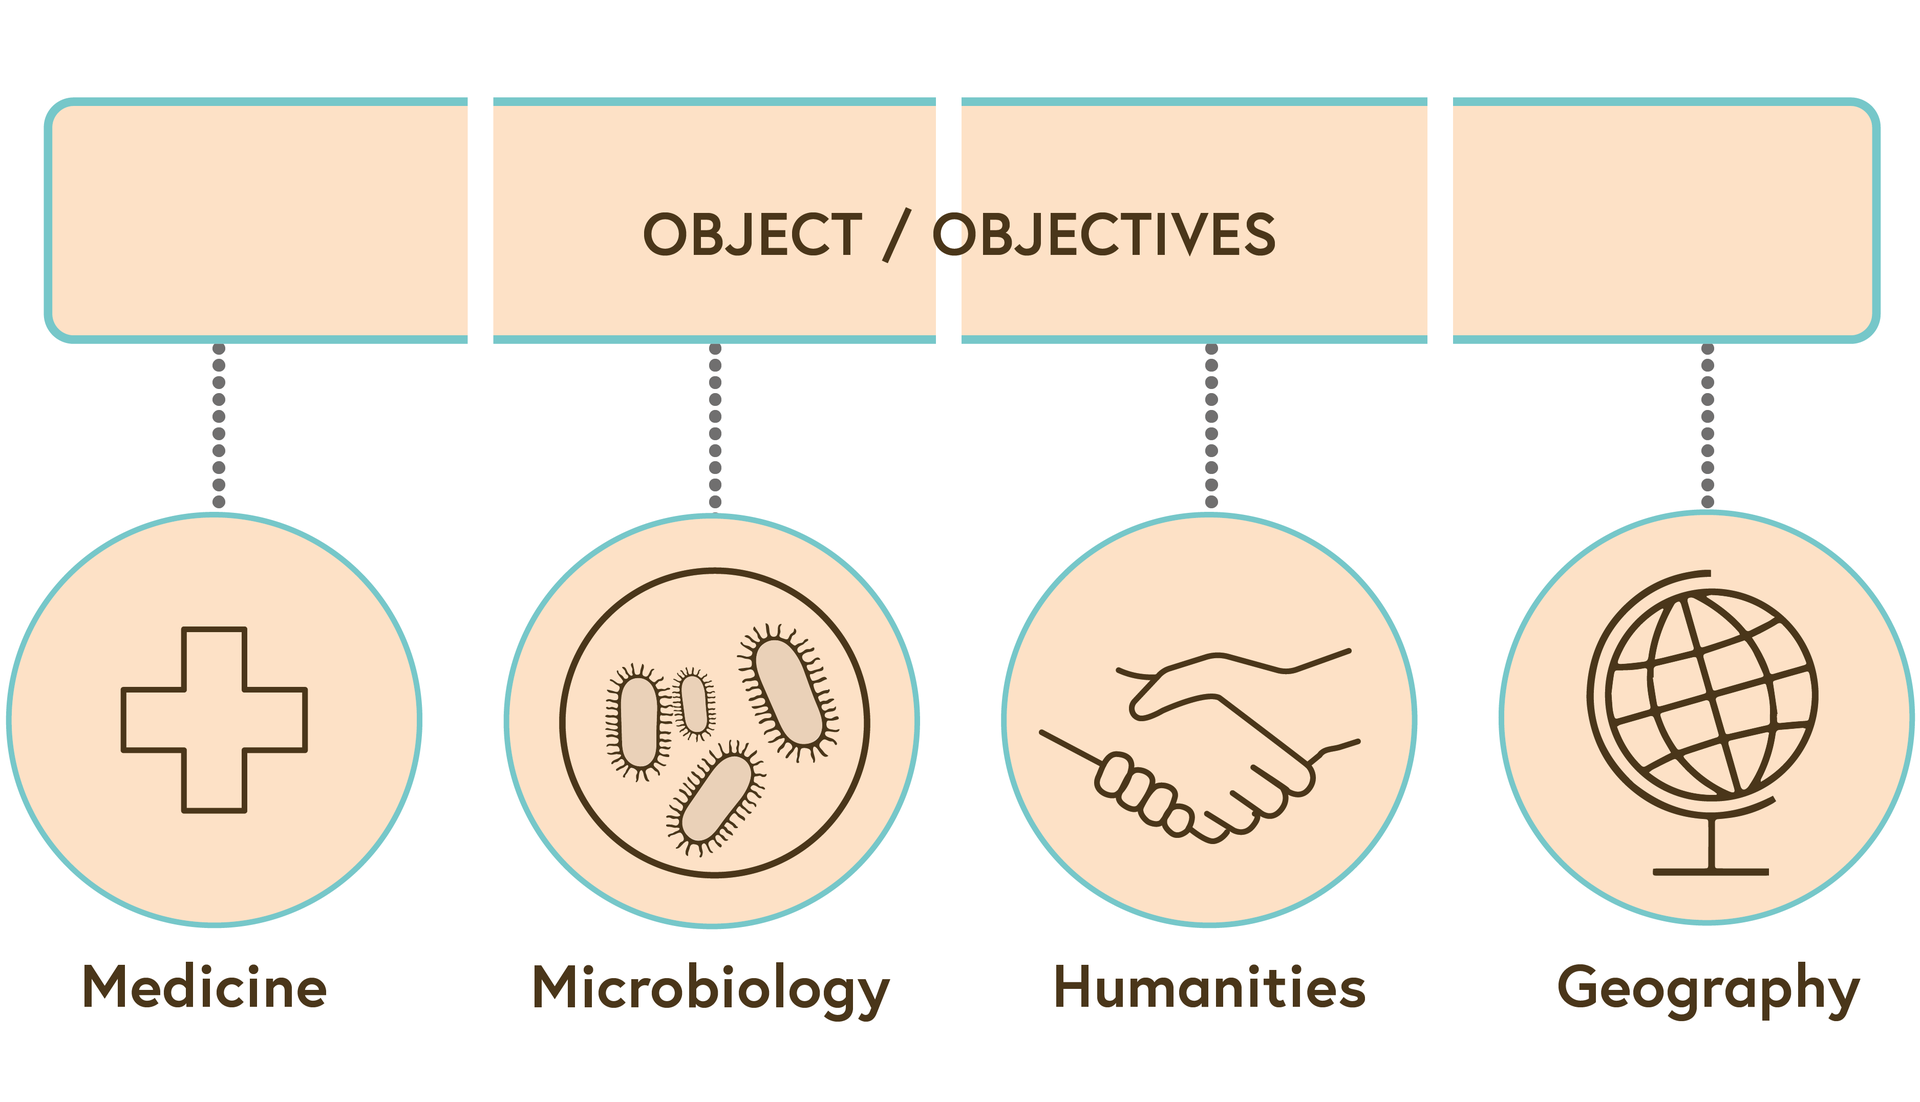 An illustration showing how four disciplines (medicine, microbiology, humanities and geography) approach their own object with their available tools